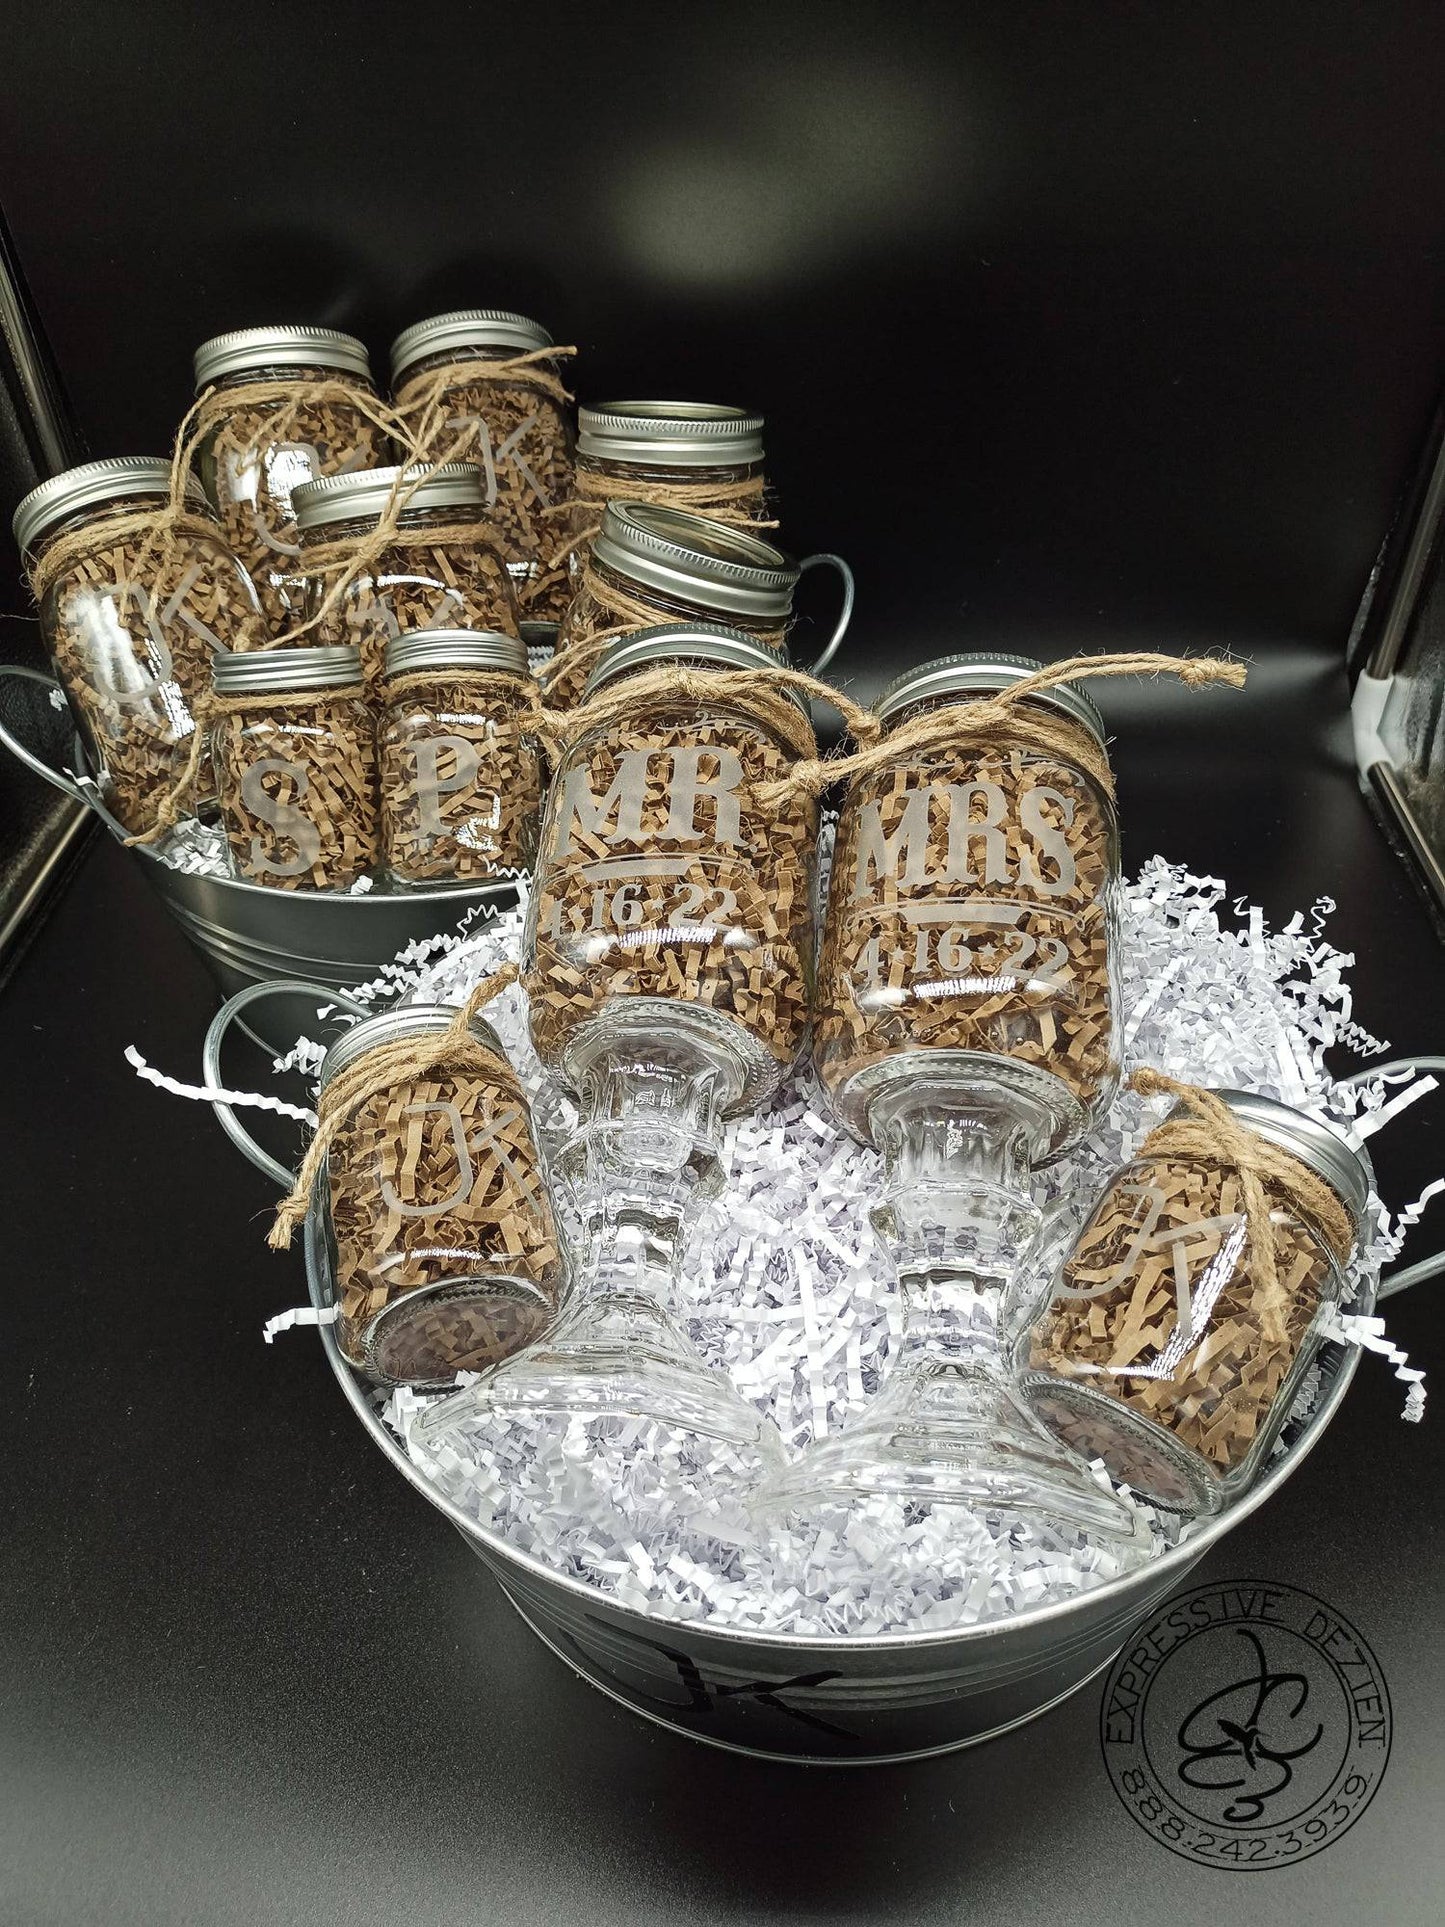 Rustic Rancher Wedding Set - Engraved Mason Jar Toasting and Wedding party Glasses with Salt & Pepper Shakers - Expressive DeZien 